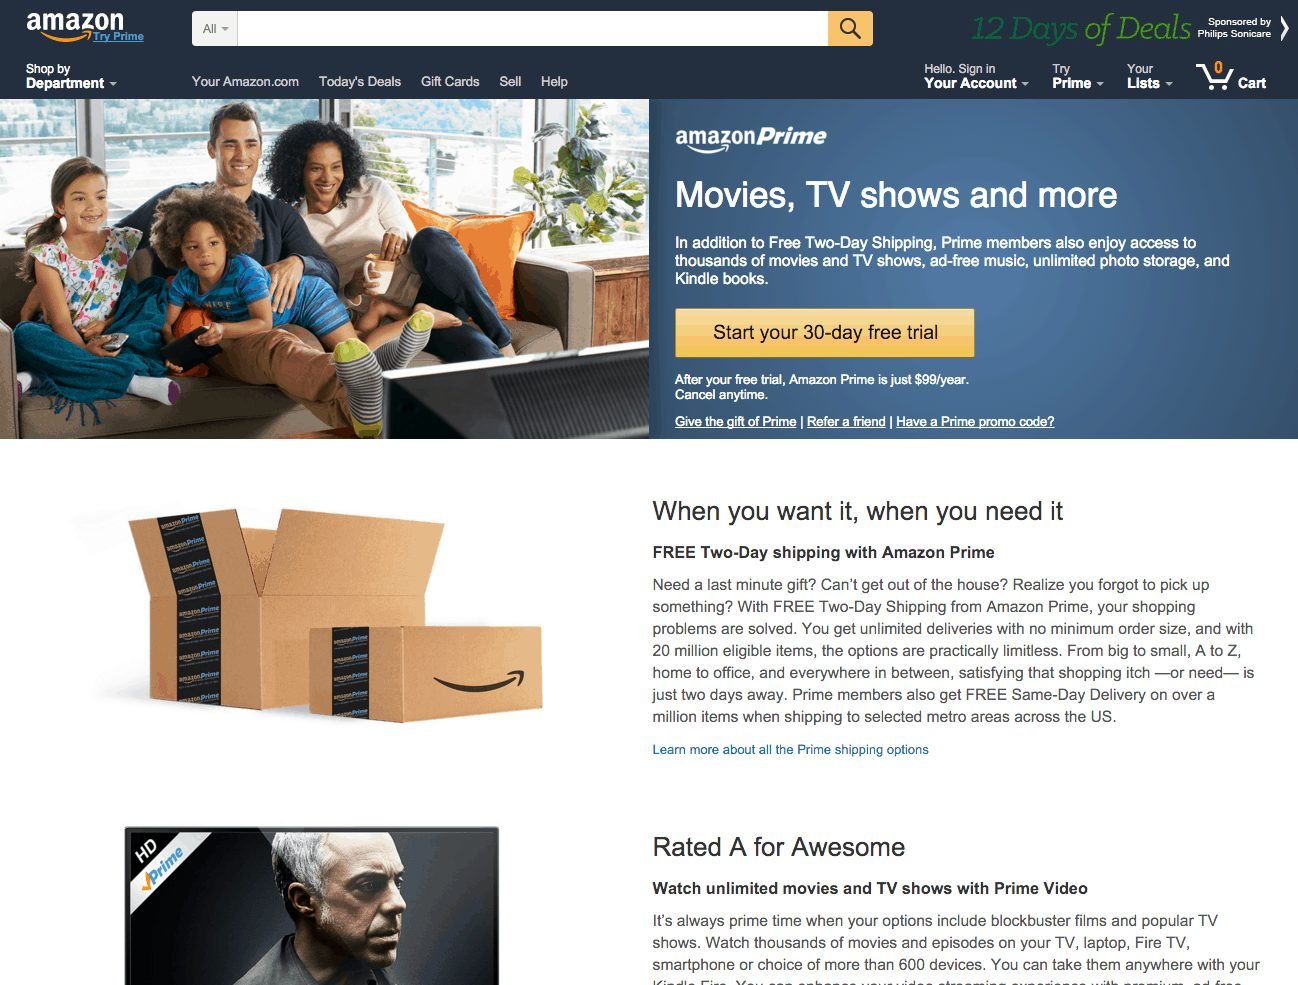 Amazon Prime Is A Great Example Of A Paid Membership Program